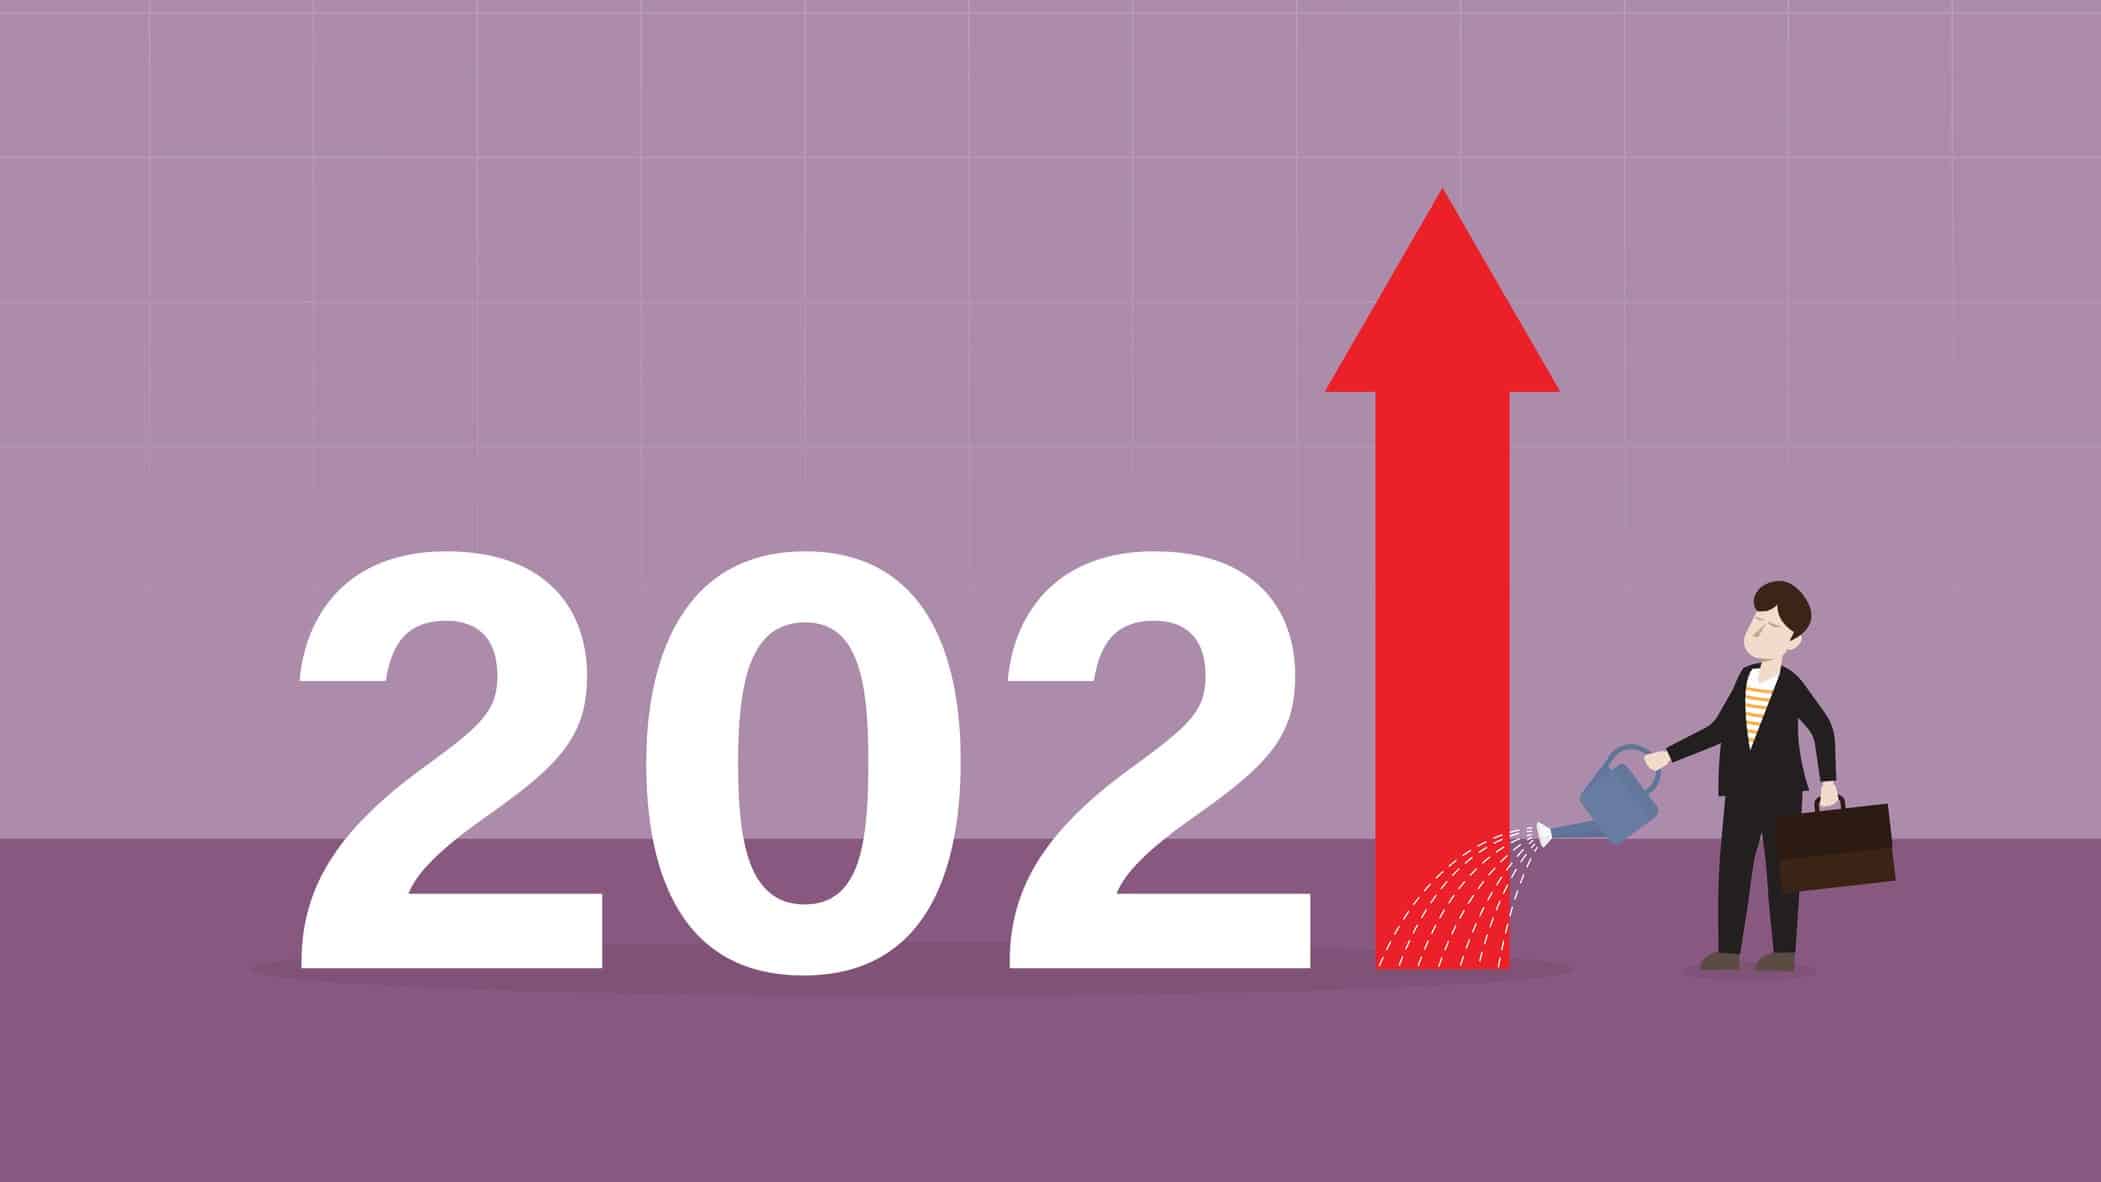 2021 logo with an arrow representing growth and watering the arrow